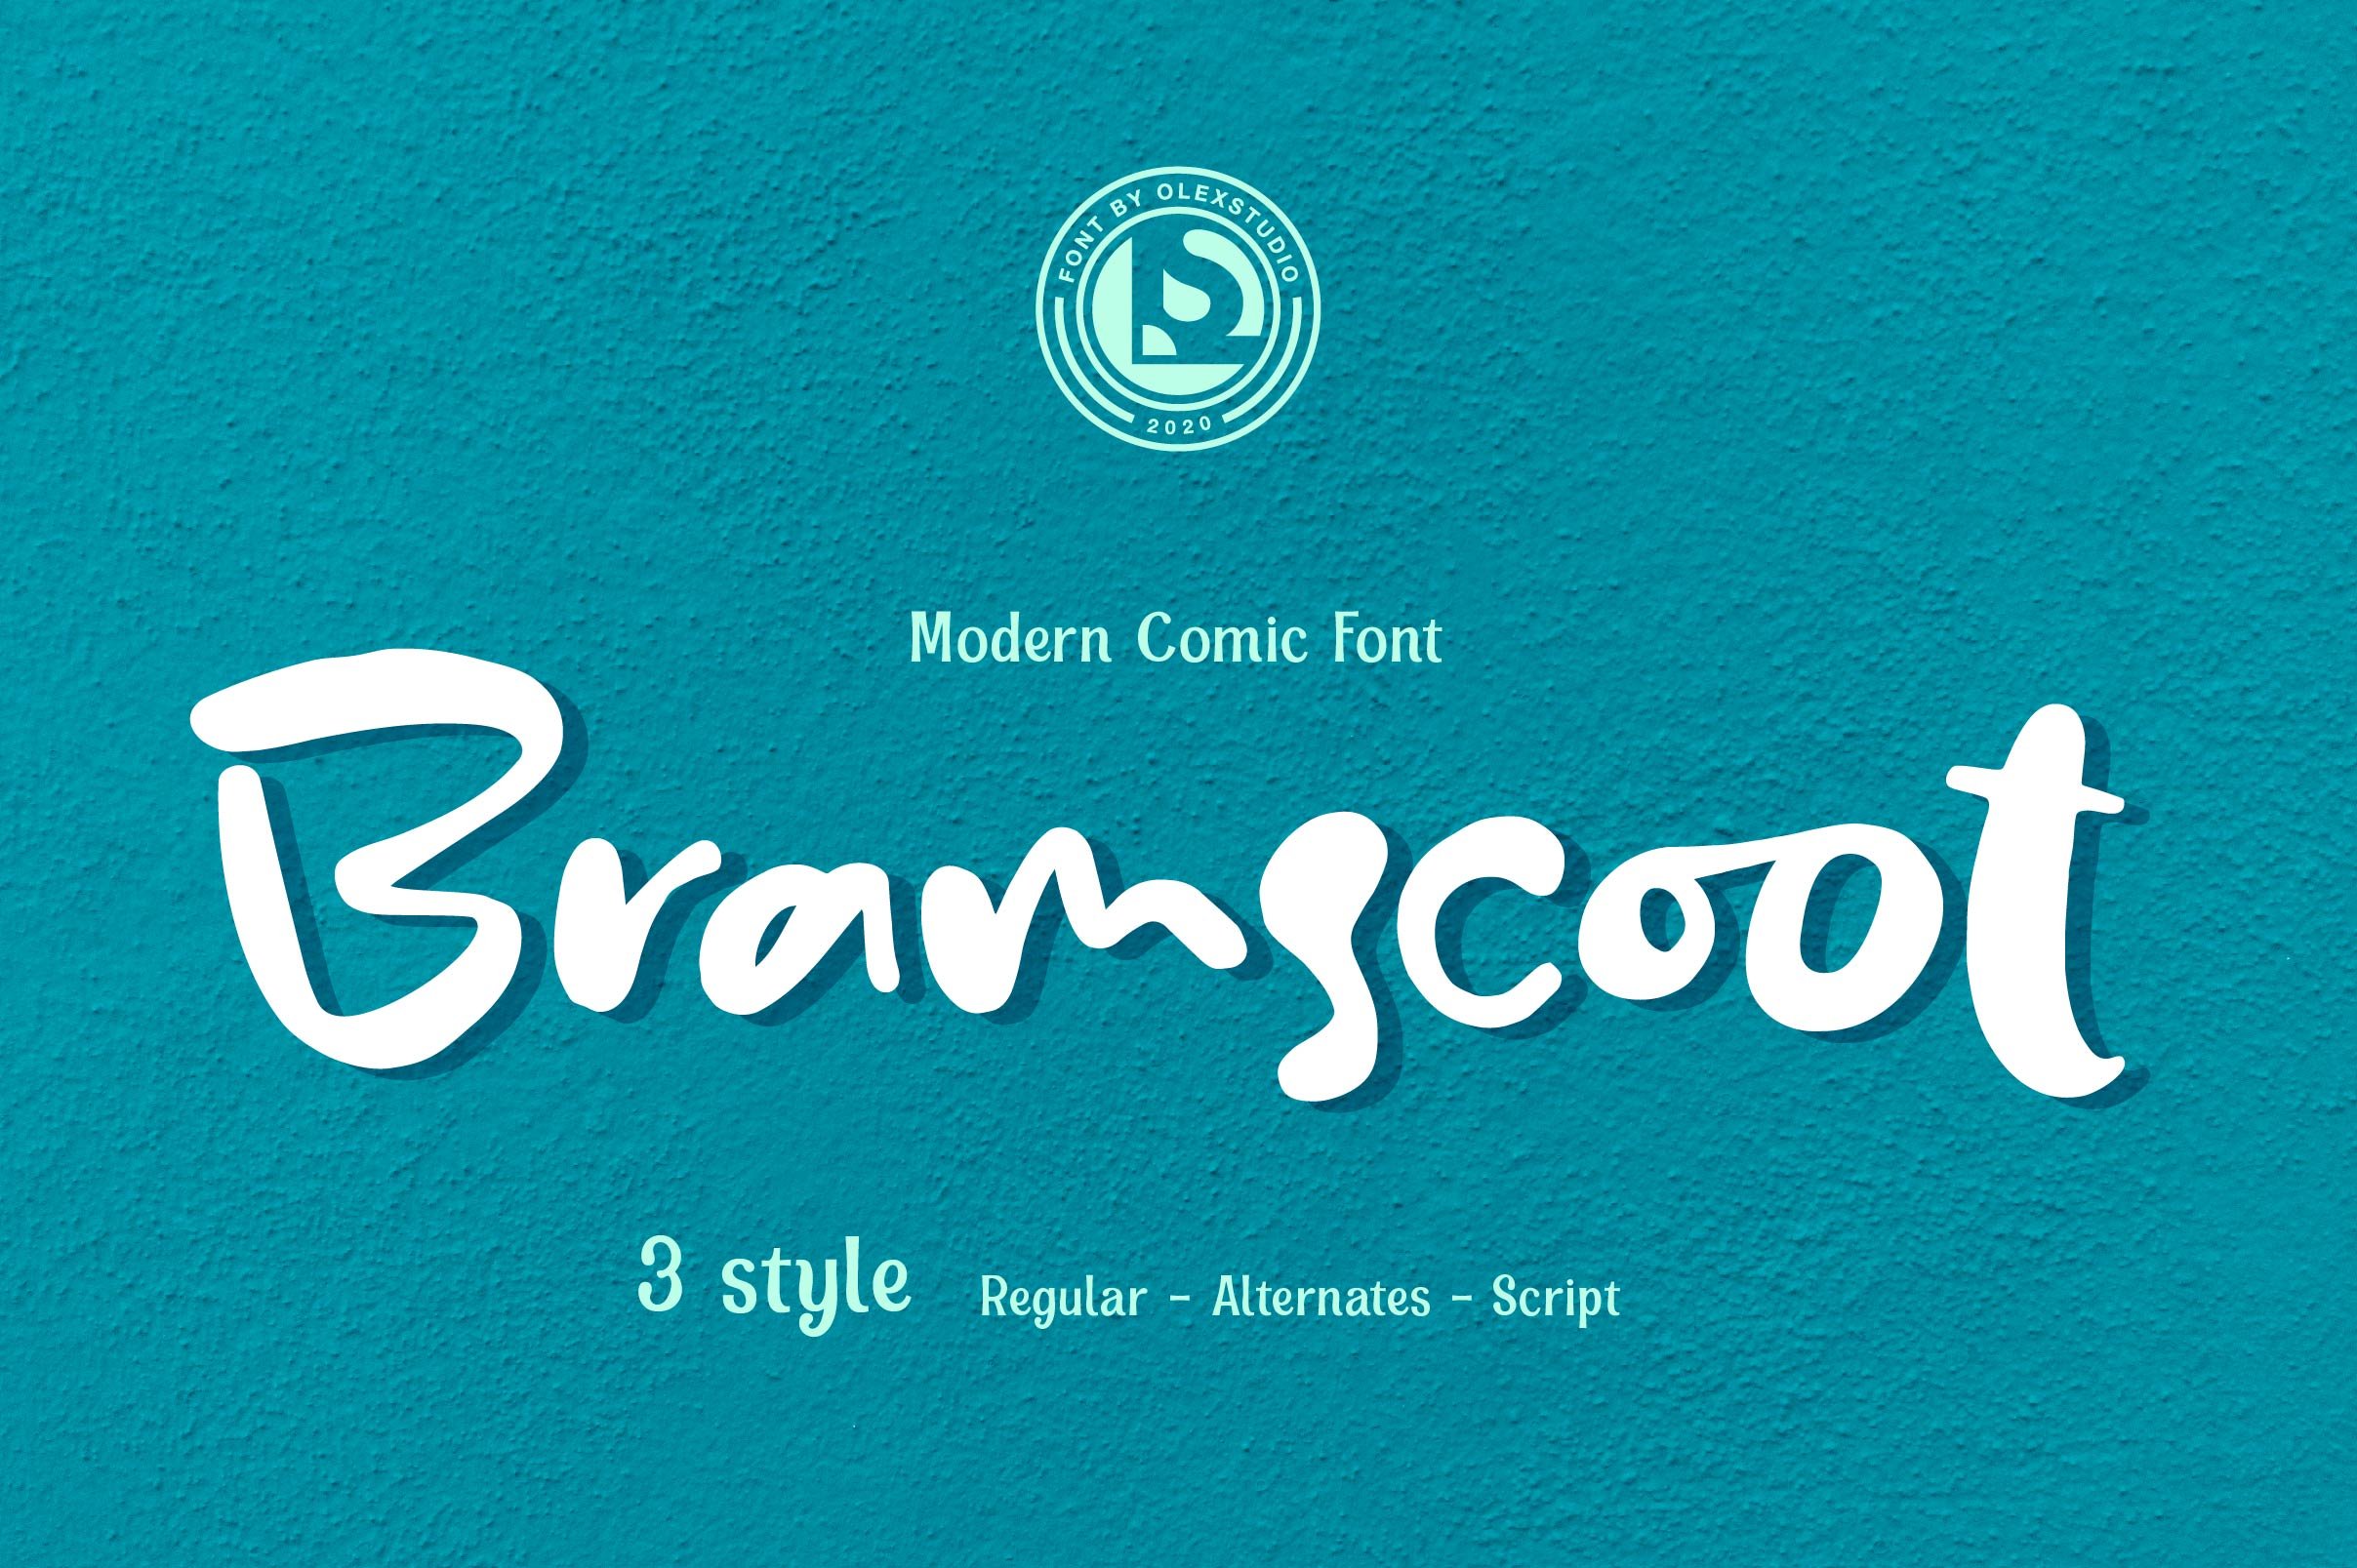 Bramscoot - modern comic cover image.